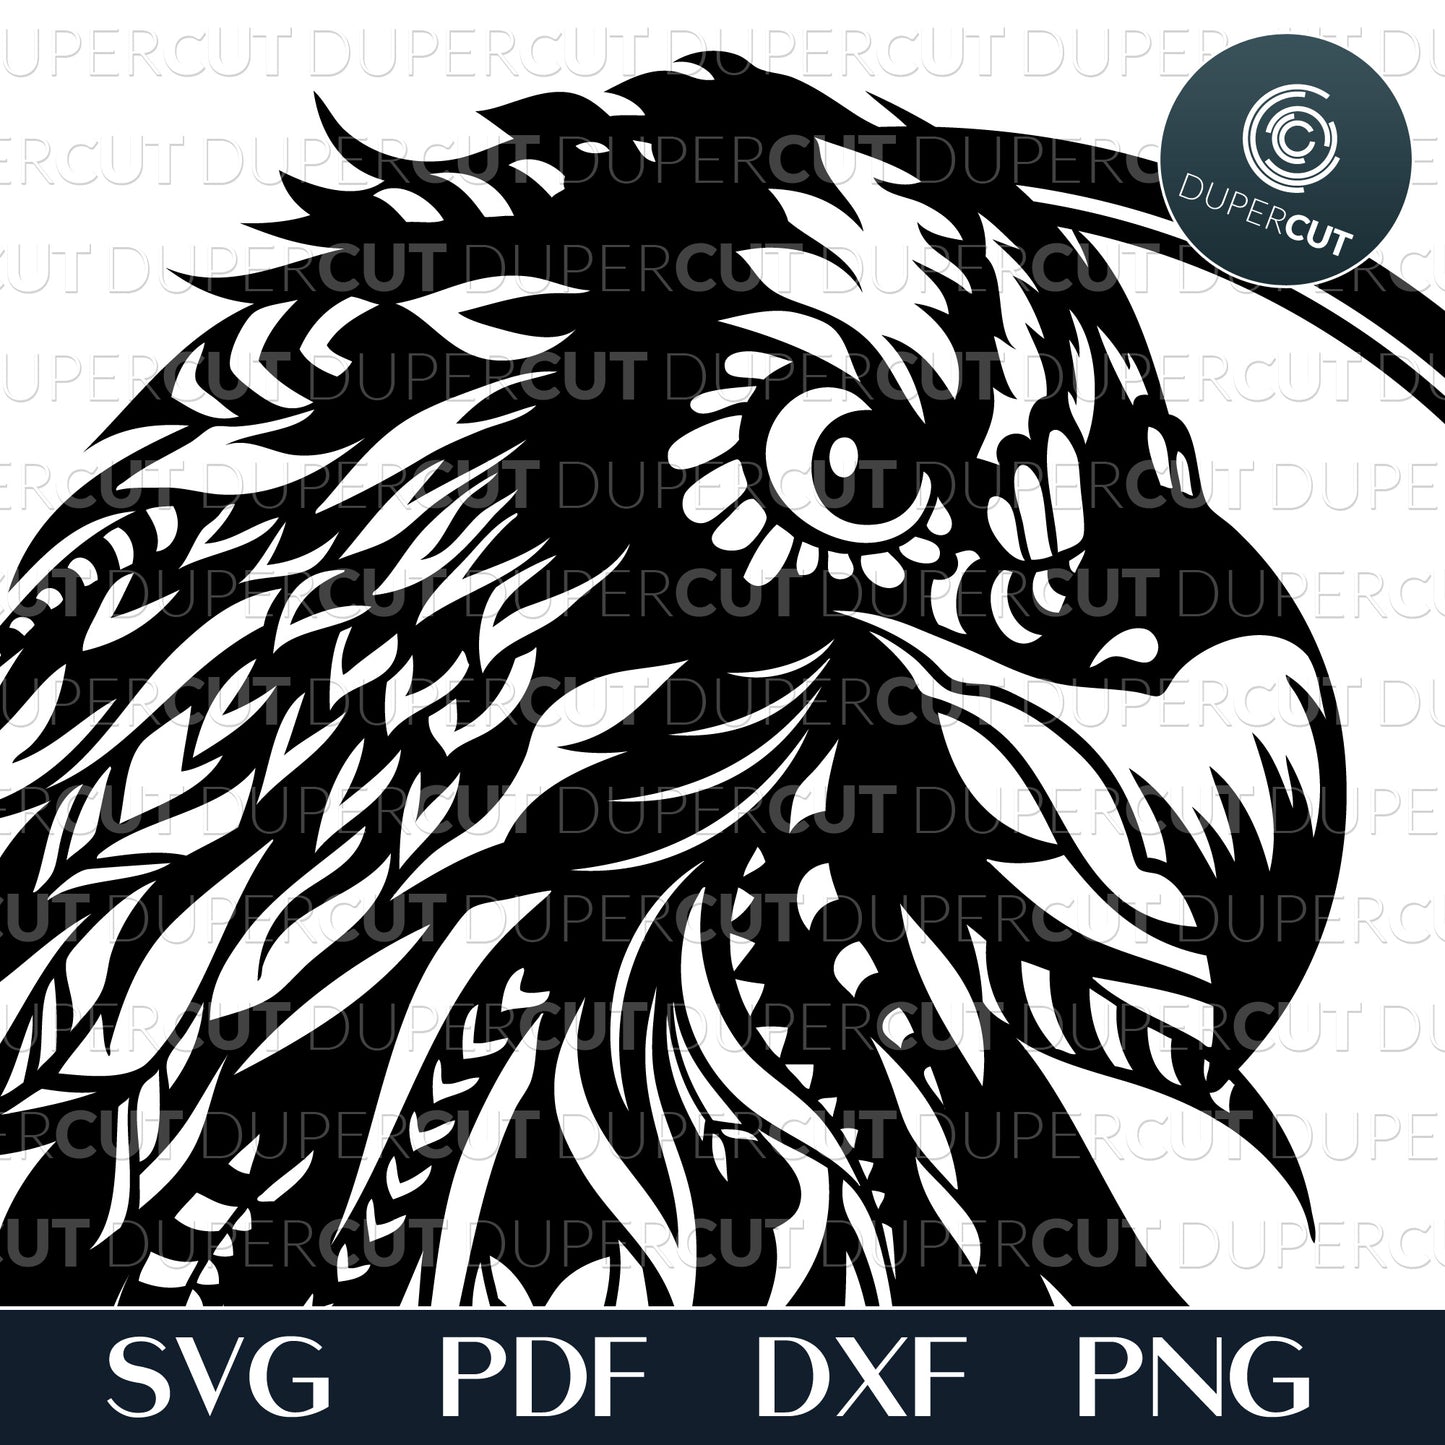 Decorative Eagle laser template. SVG PNG DXF cutting files for Cricut, Glowforge, Silhouette cameo, laser engraving